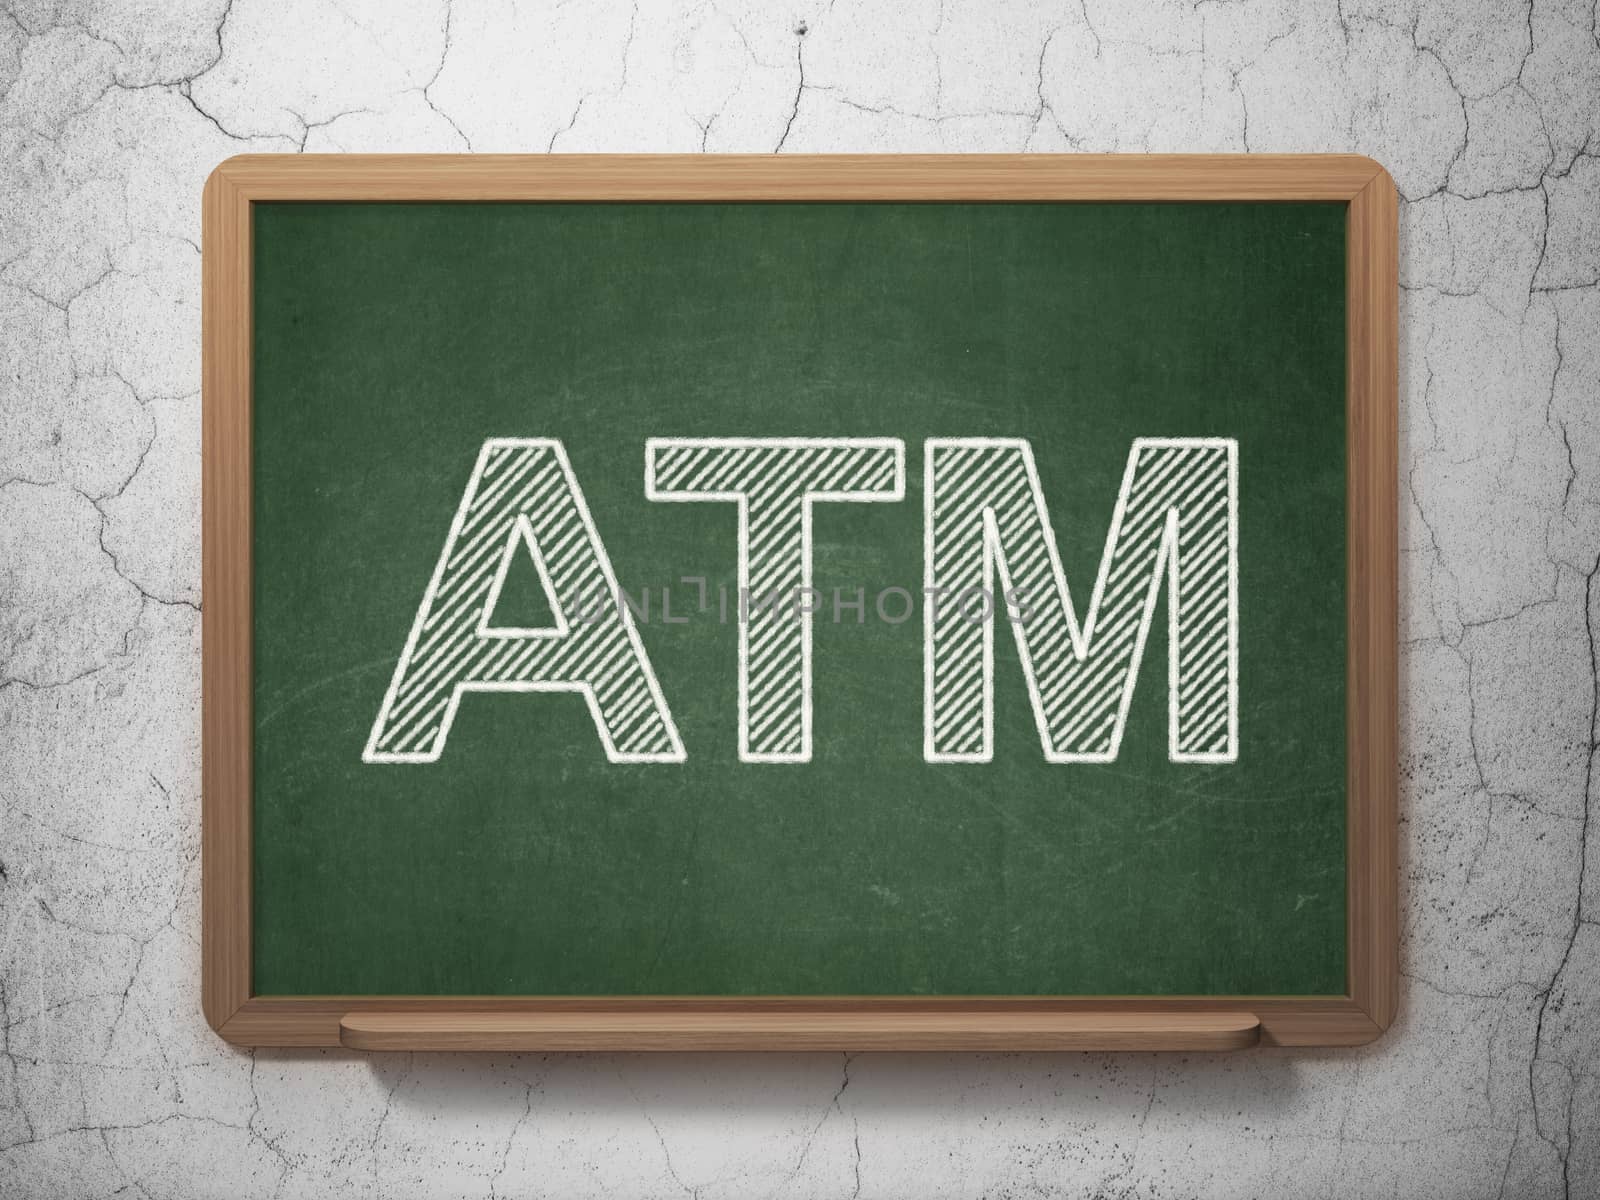 Banking concept: text ATM on Green chalkboard on grunge wall background, 3D rendering